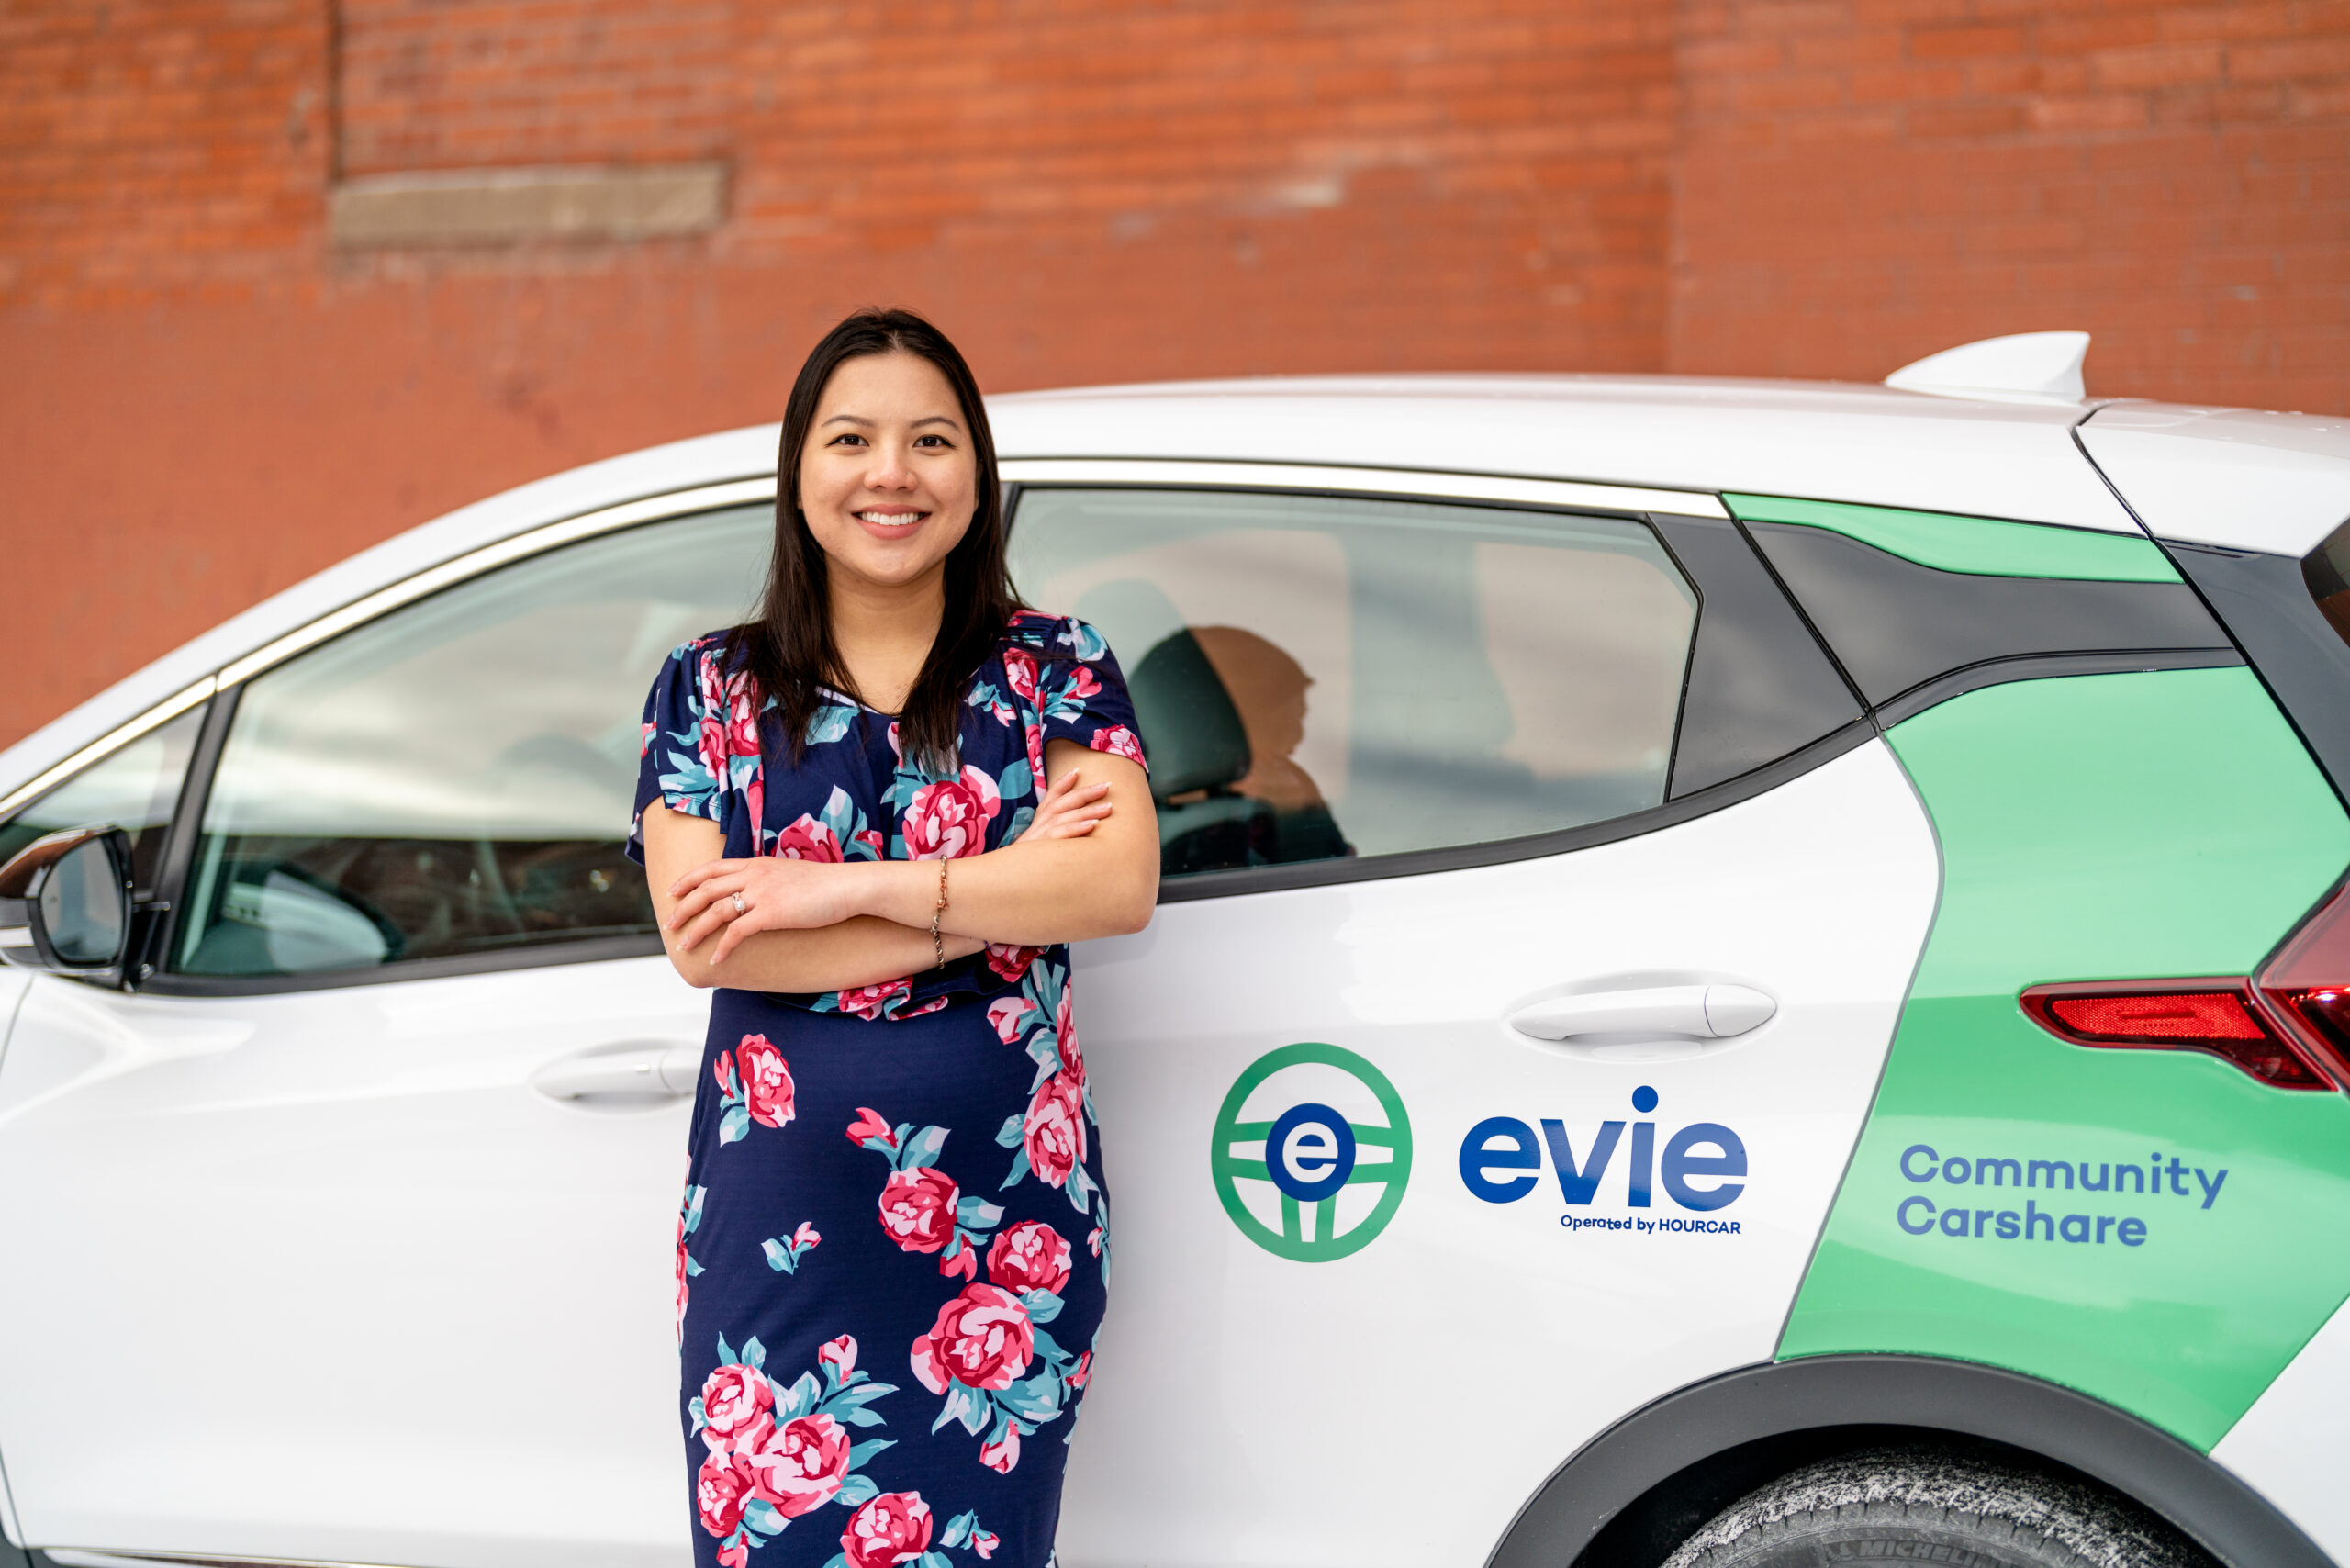 Council Member Nelsie Yang with Evie Carshare in East Saint Paul